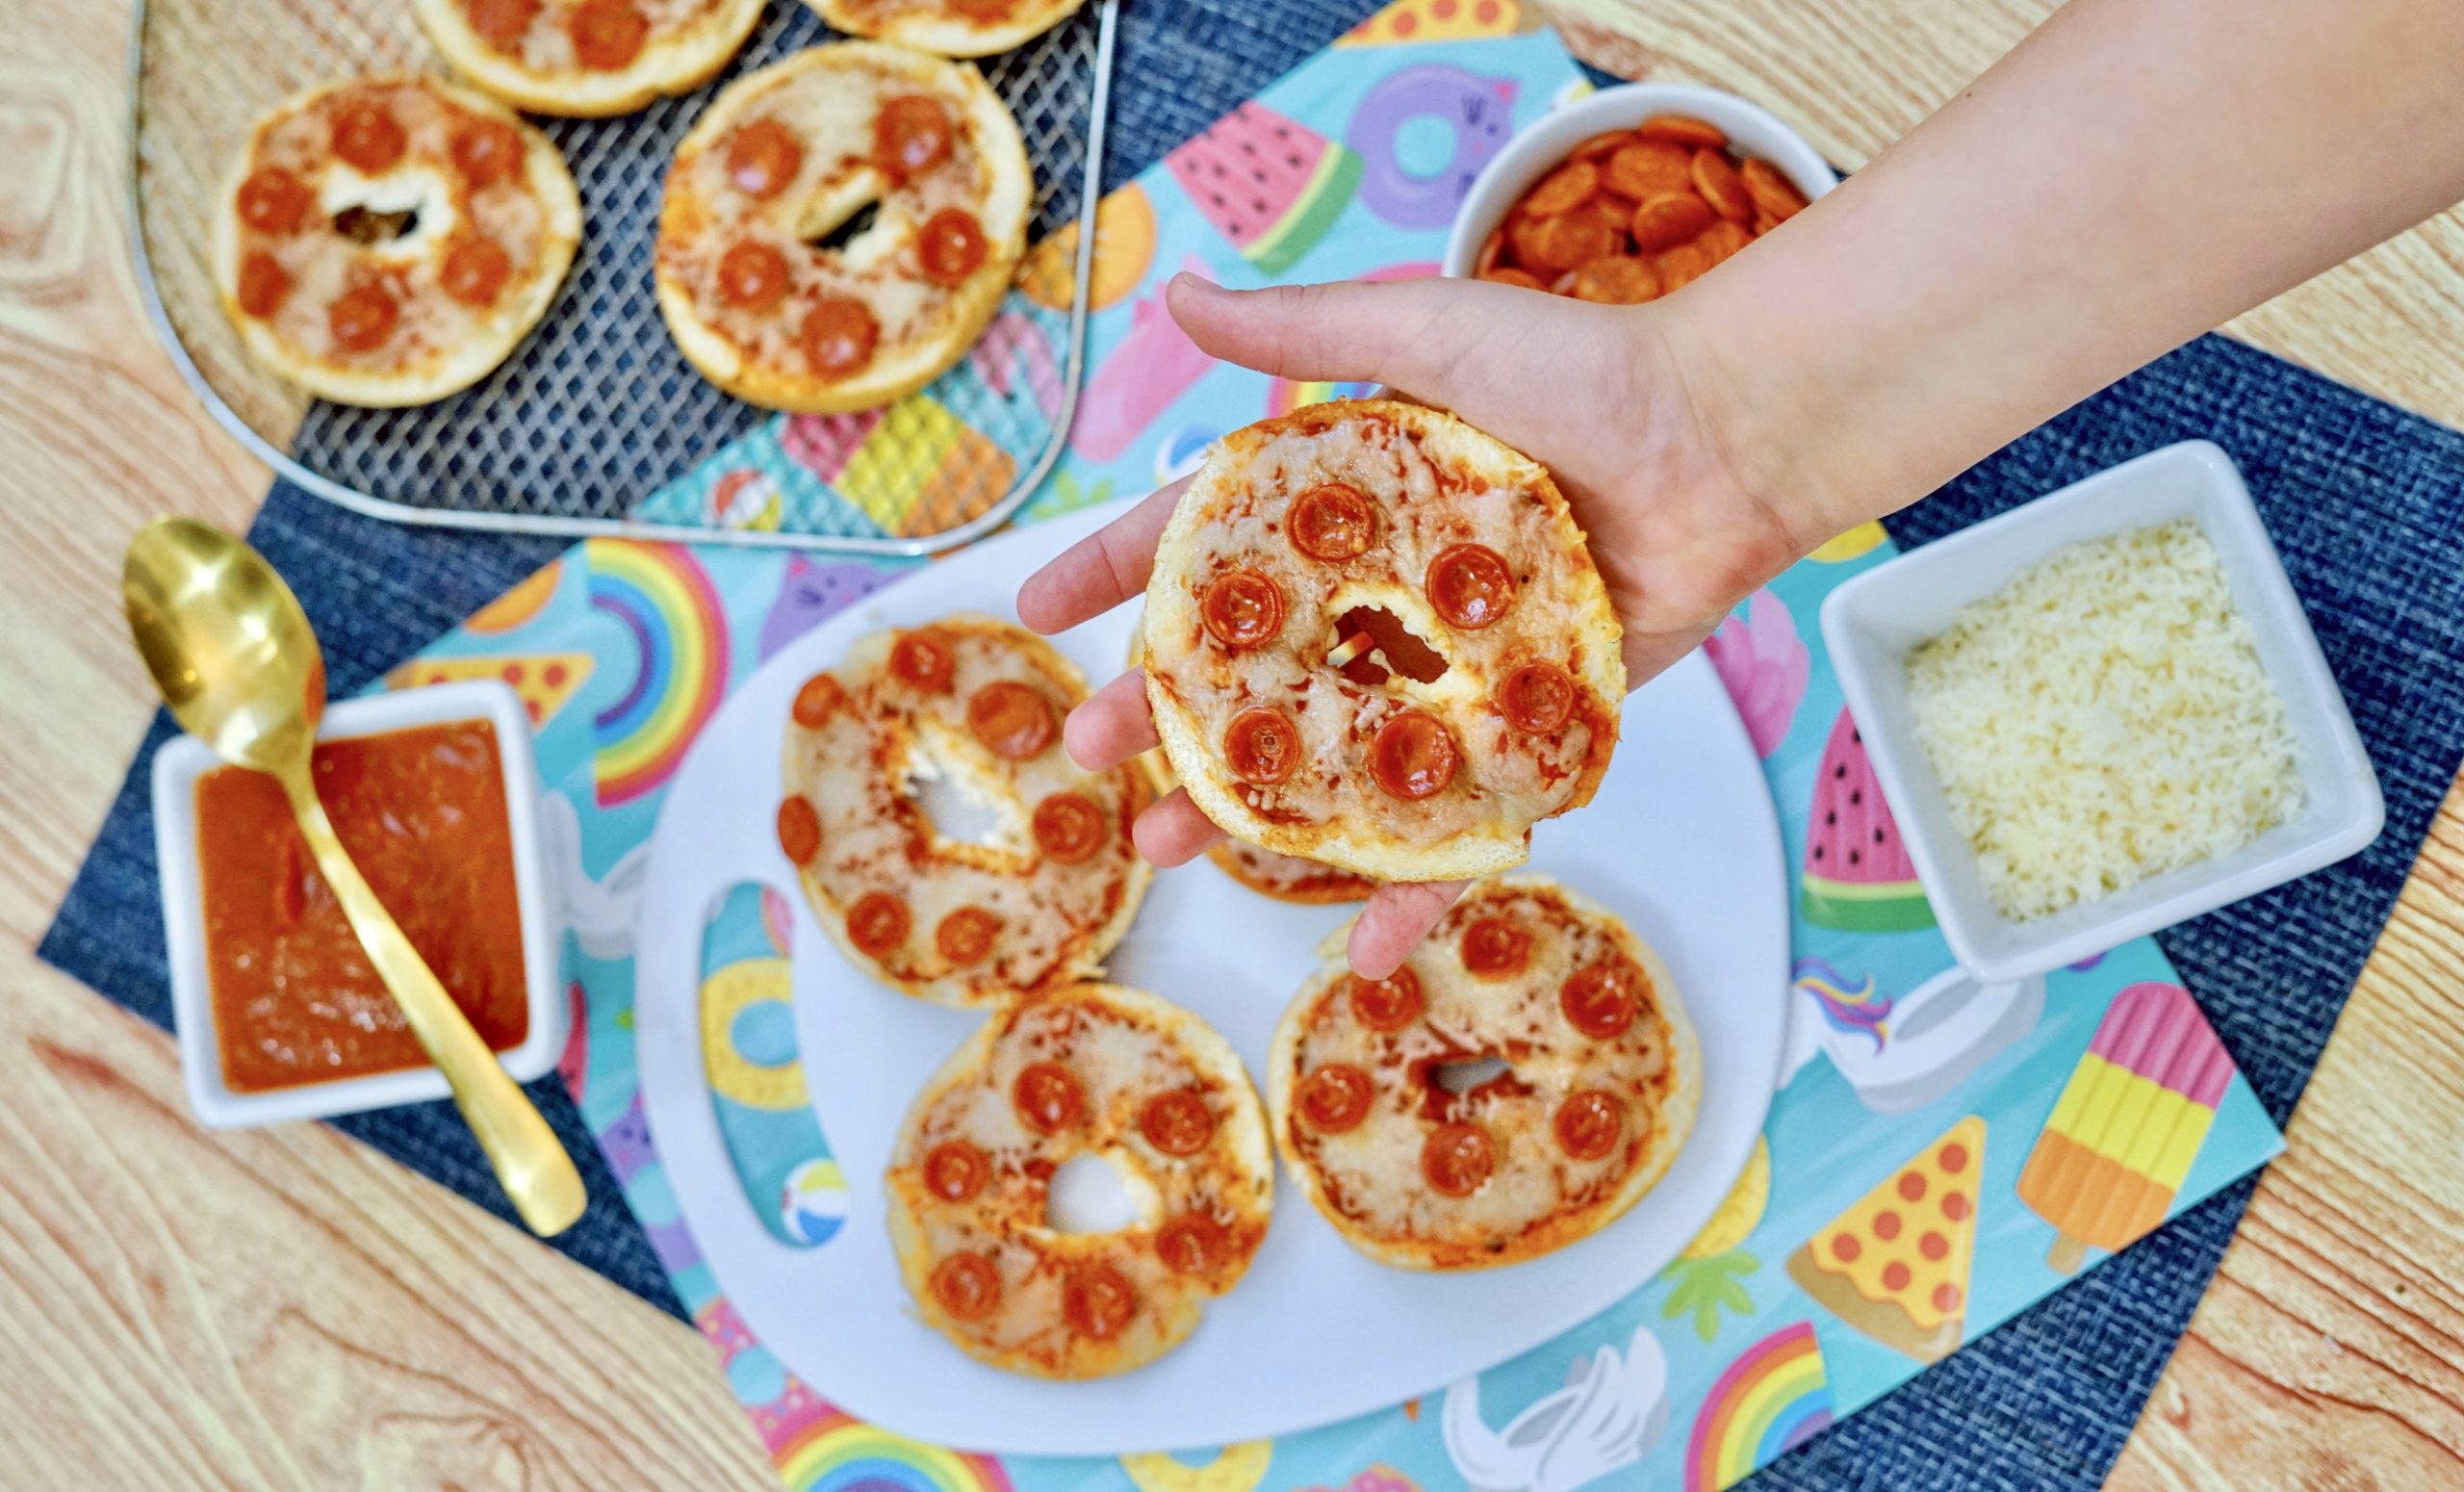 A childs hand holding an pepperoni bagel bite in the foreground. 3 Bagel bites on a white plate in the background, with tomato sauce in a bowl with a spoon. Mozzarella cheese in a bowl. An Air fryer rack with three more bagel bites sitting next to the plate.